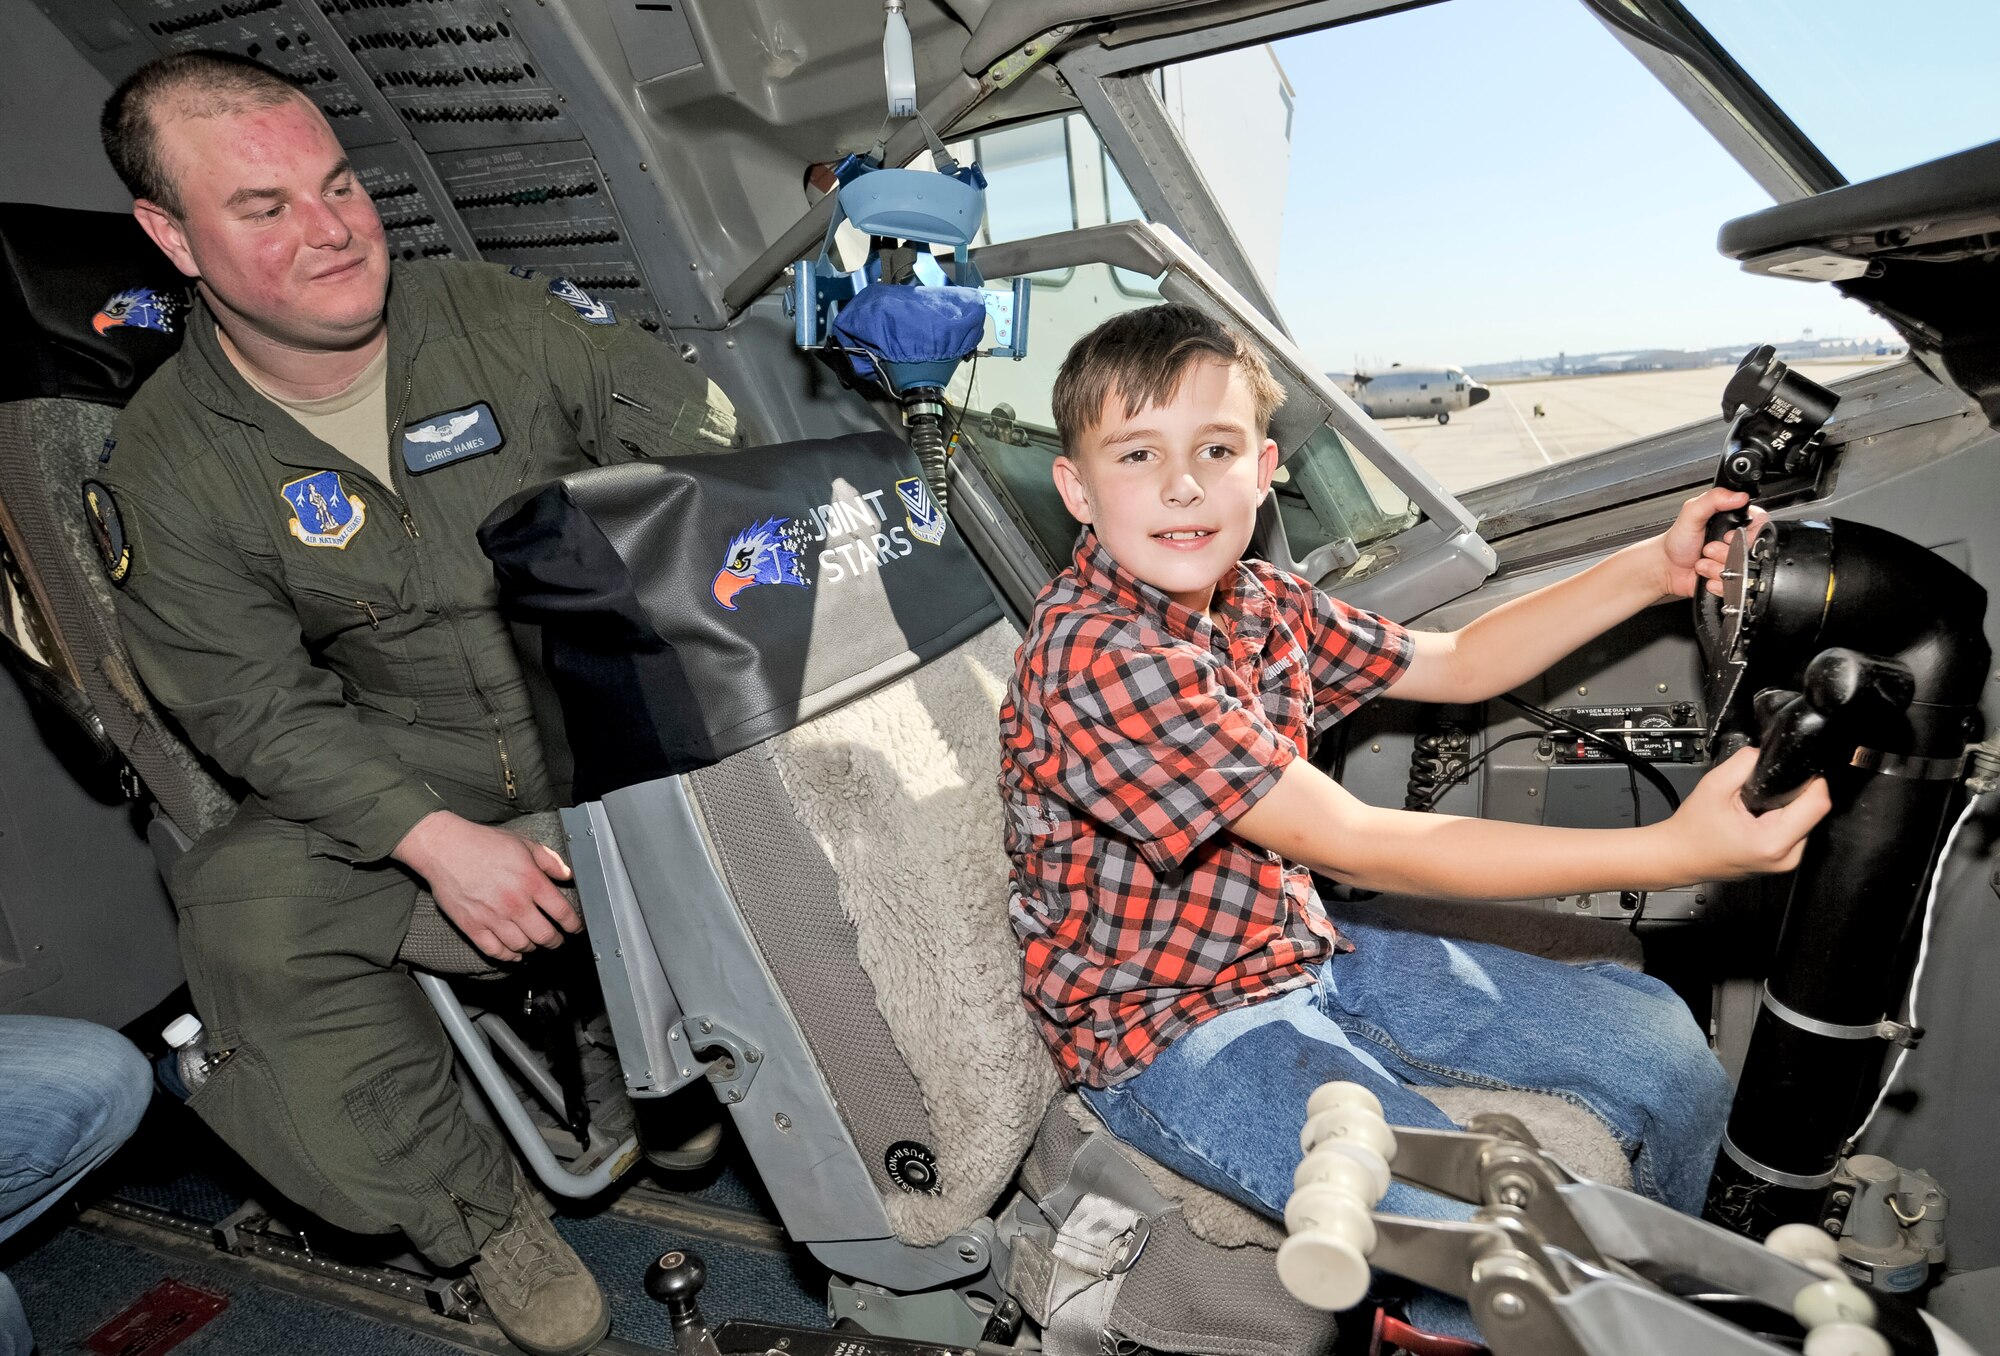 Josey Rackley learns about the E-8C Joint STARS aircraft from Capt. Christopher Hanes, 128th Airborne Command and Control Squadron, during the 116th and 461st Air Control wings annual Family Day celebration at Robins Air Force Base, Ga., Nov. 3, 2012. This marked the 10th annual Family Day for JSTARS.  The yearly event provides an opportunity to thank families for their support. (National Guard photo by Master Sgt. Roger Parsons/Released)